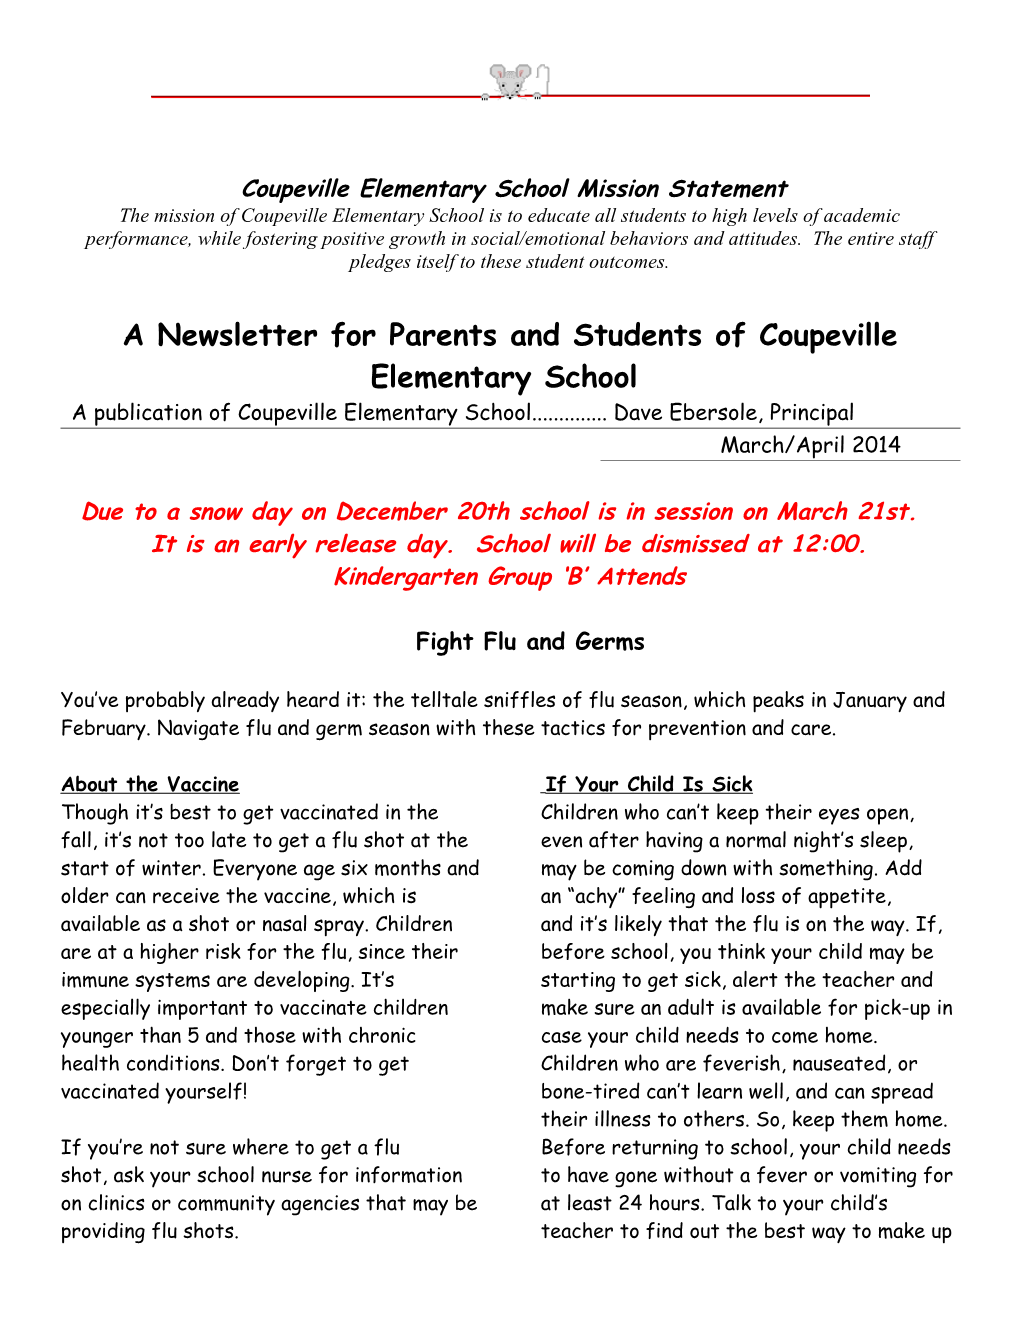 A Newsletter for Parents and Students of Coupeville Elementary School